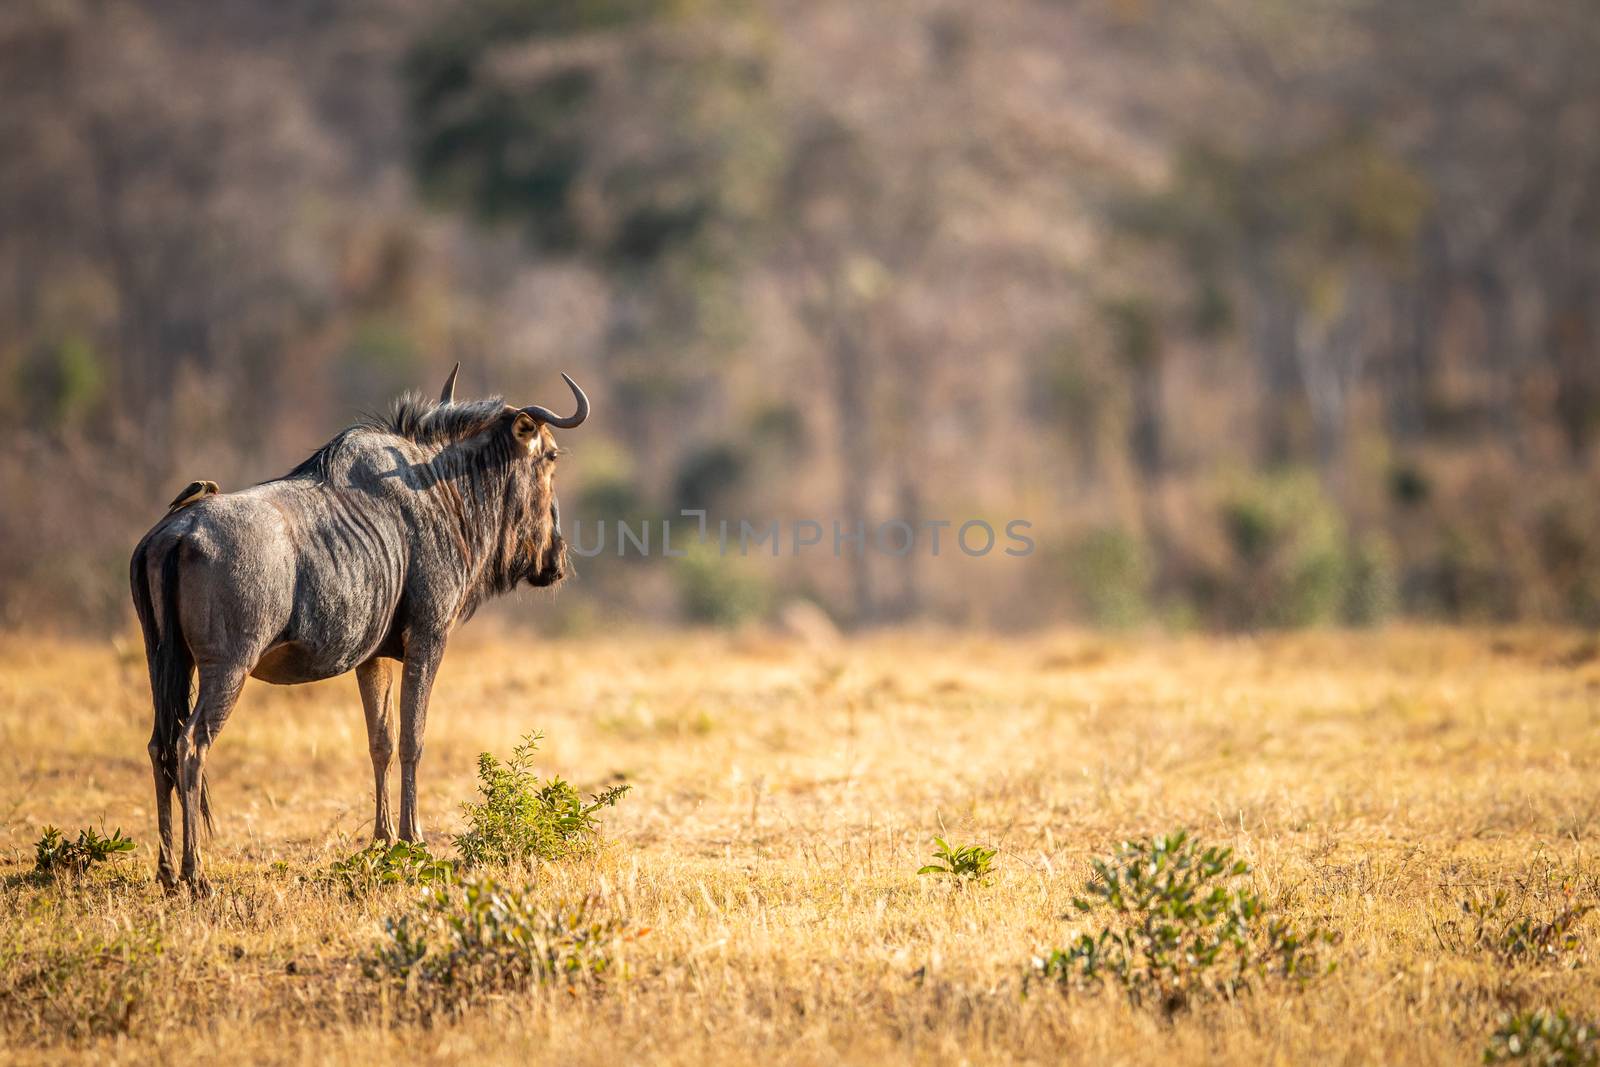 Blue wildebeest standing in the grass in the Welgevonden game reserve, South Africa.